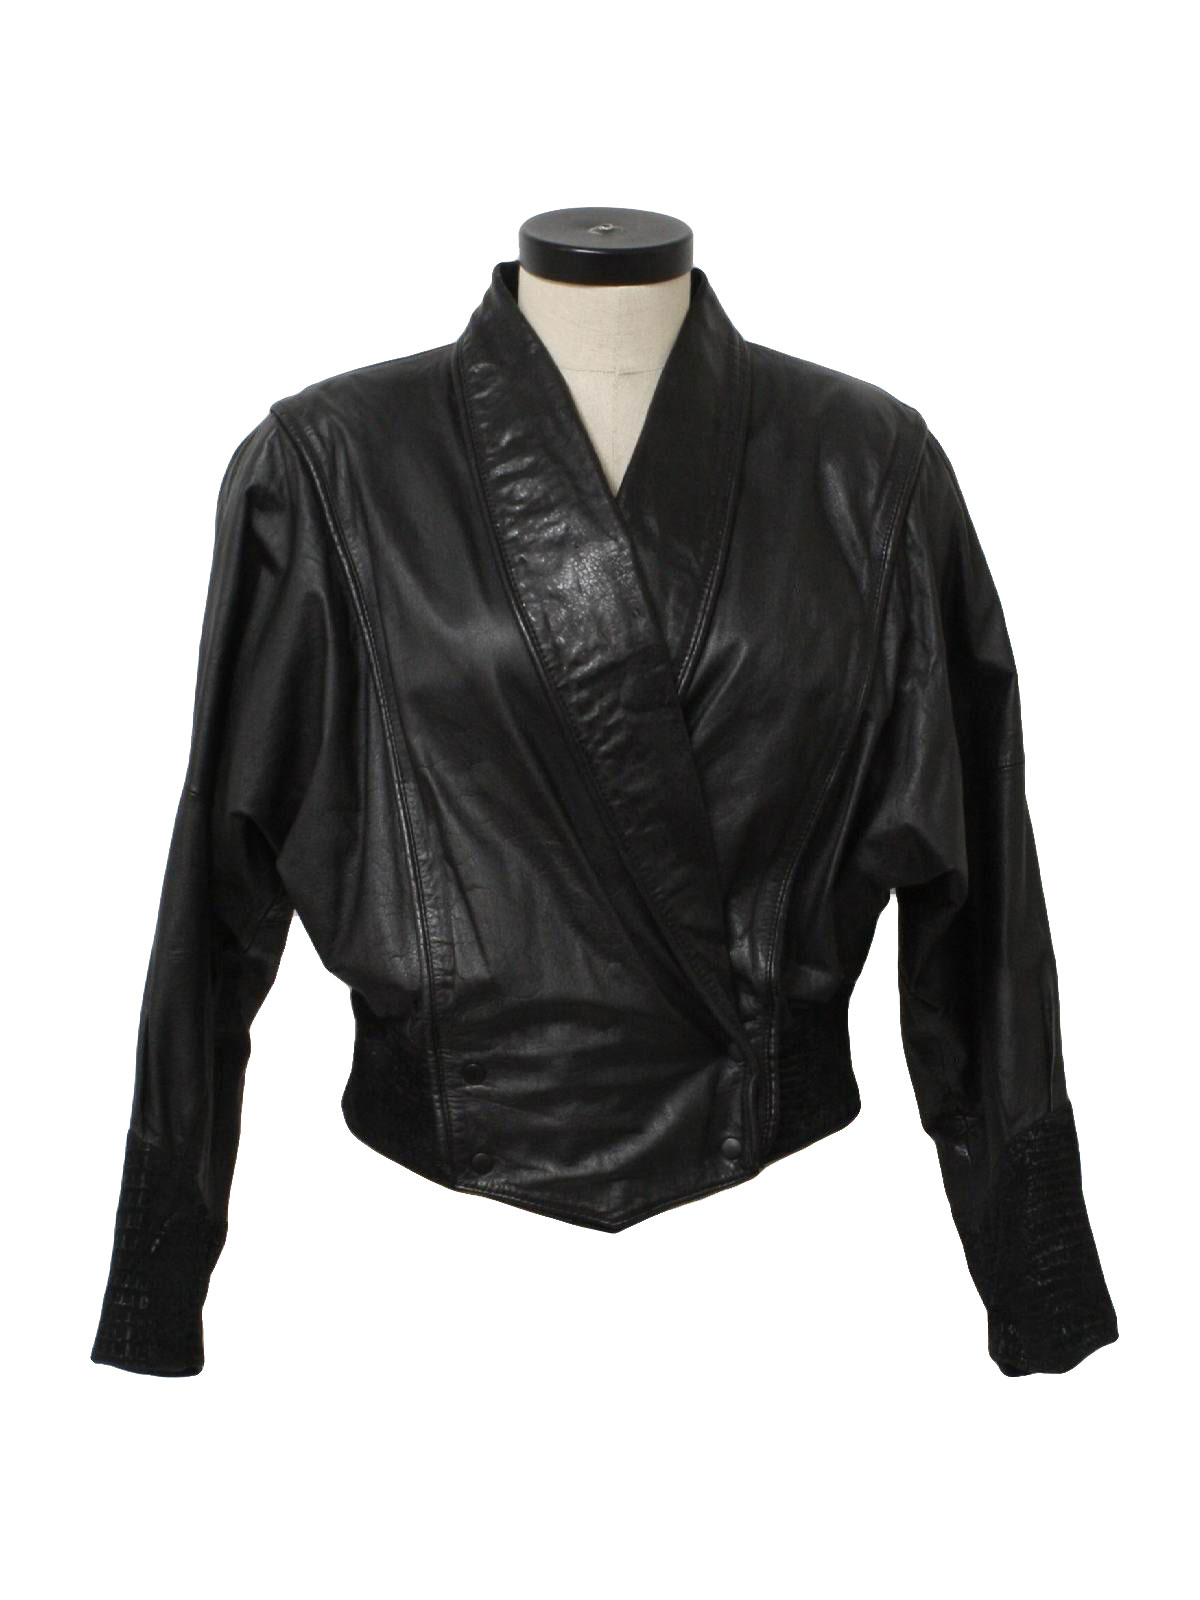 Vintage 80s Leather Jacket: 80s -G111, Made in Korea- Womens black on ...